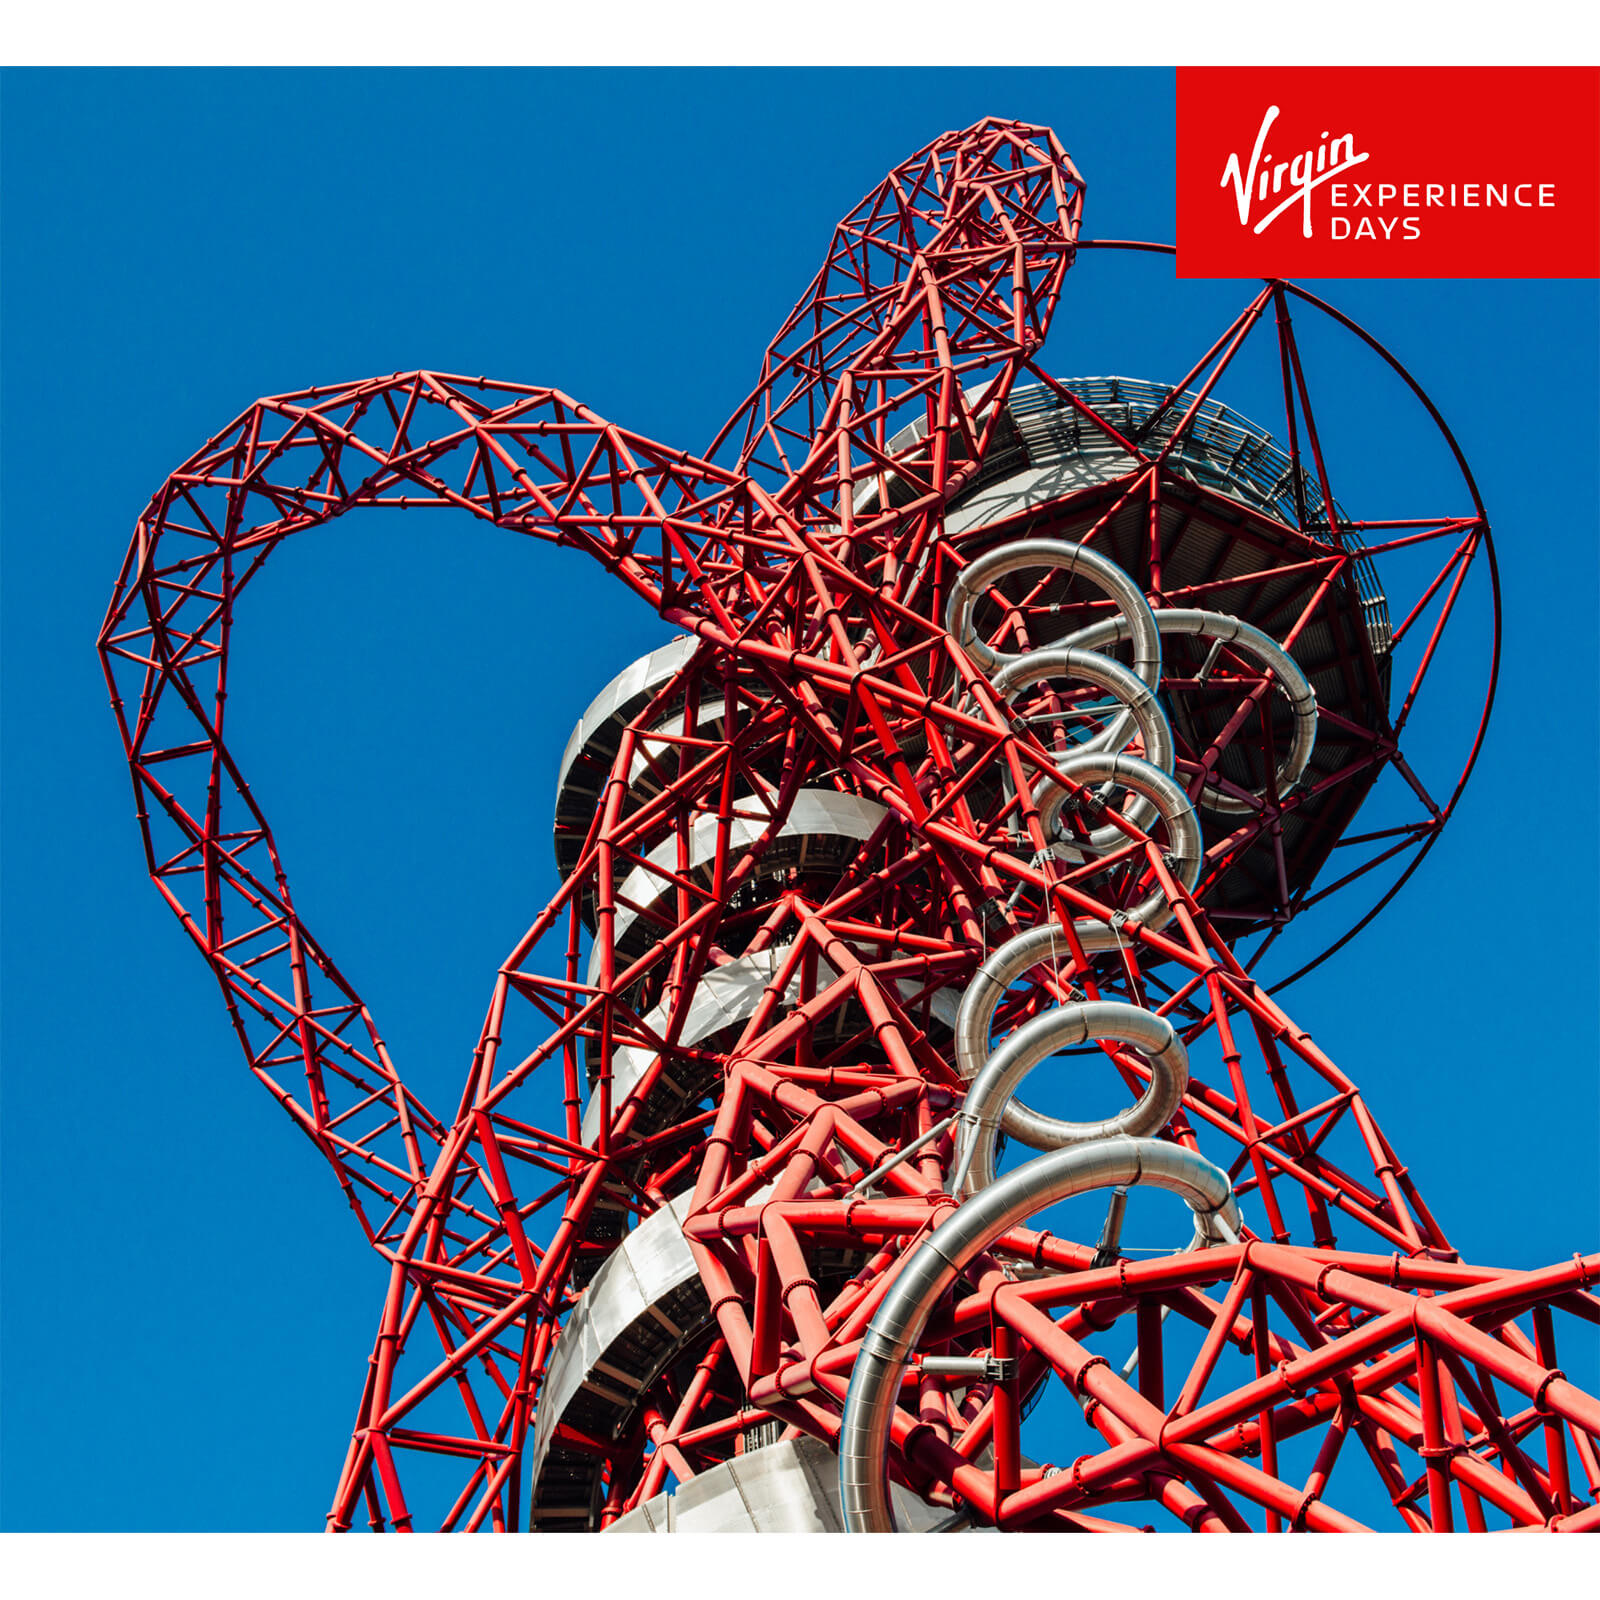 The Arcelormittal Orbit Skyline Views For Two With A Bottle Of Prosecco